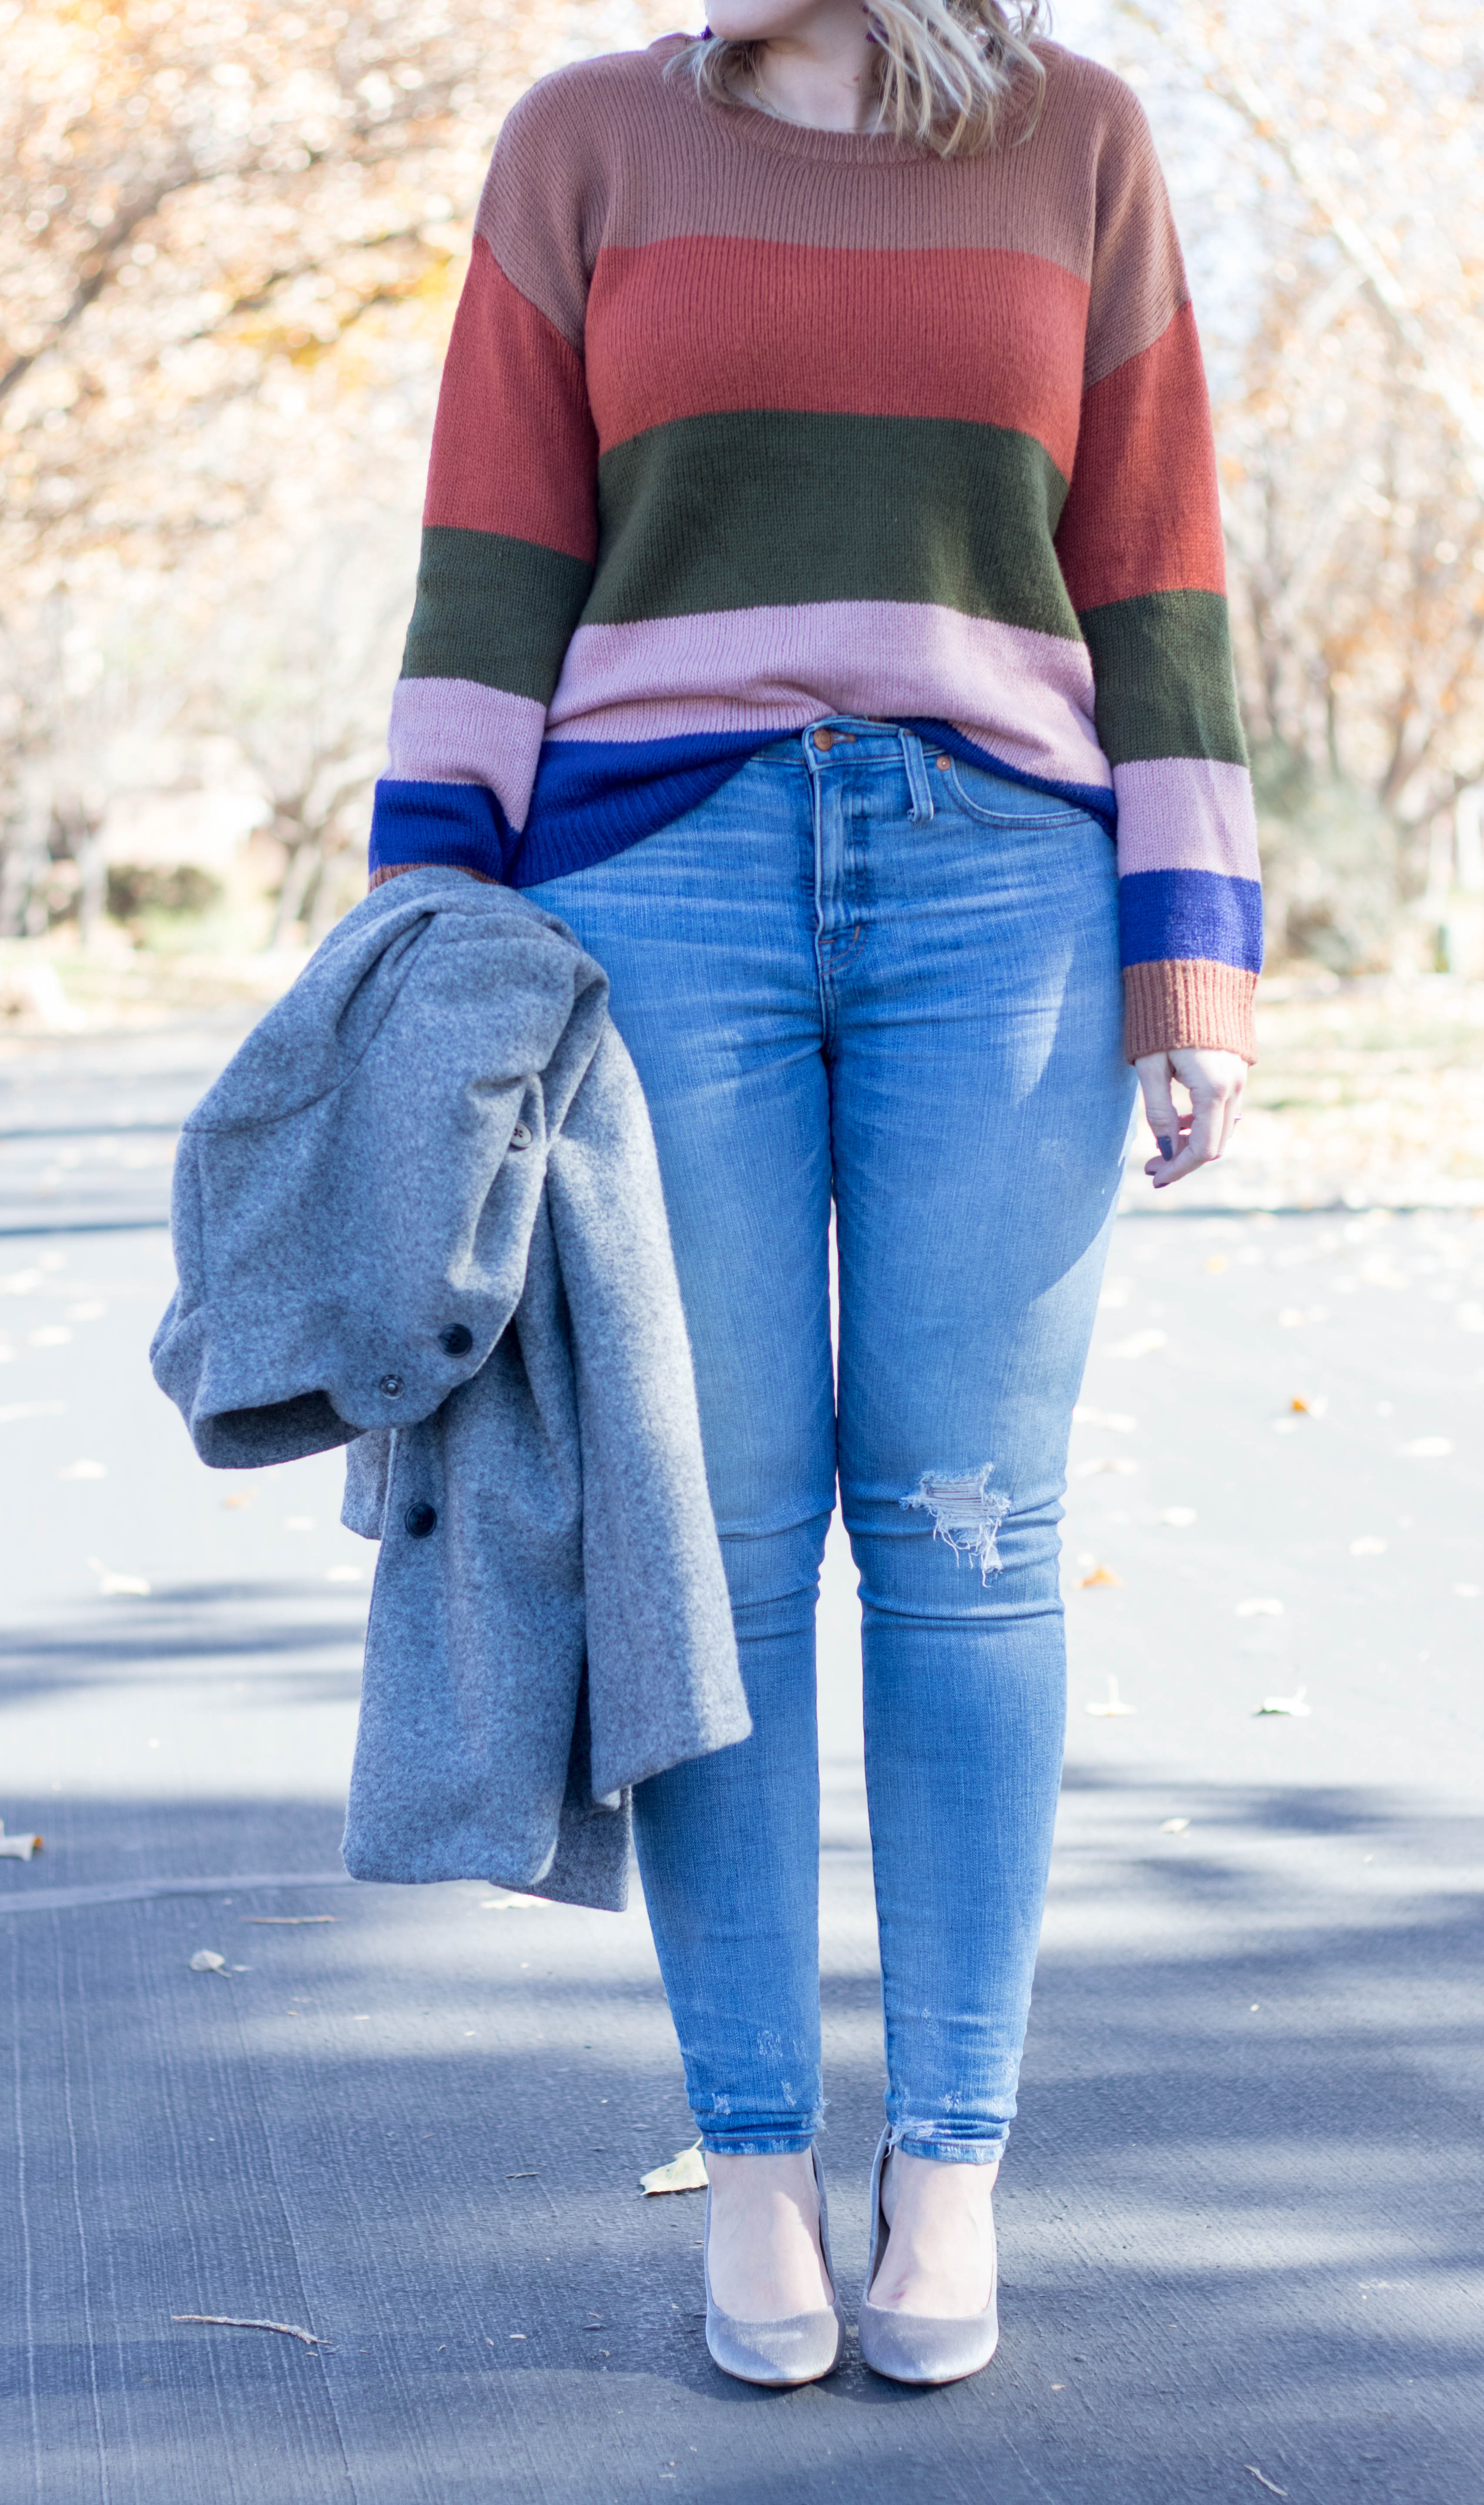 striped cozy sweater for fall #vici #falloutfit #stripedsweater